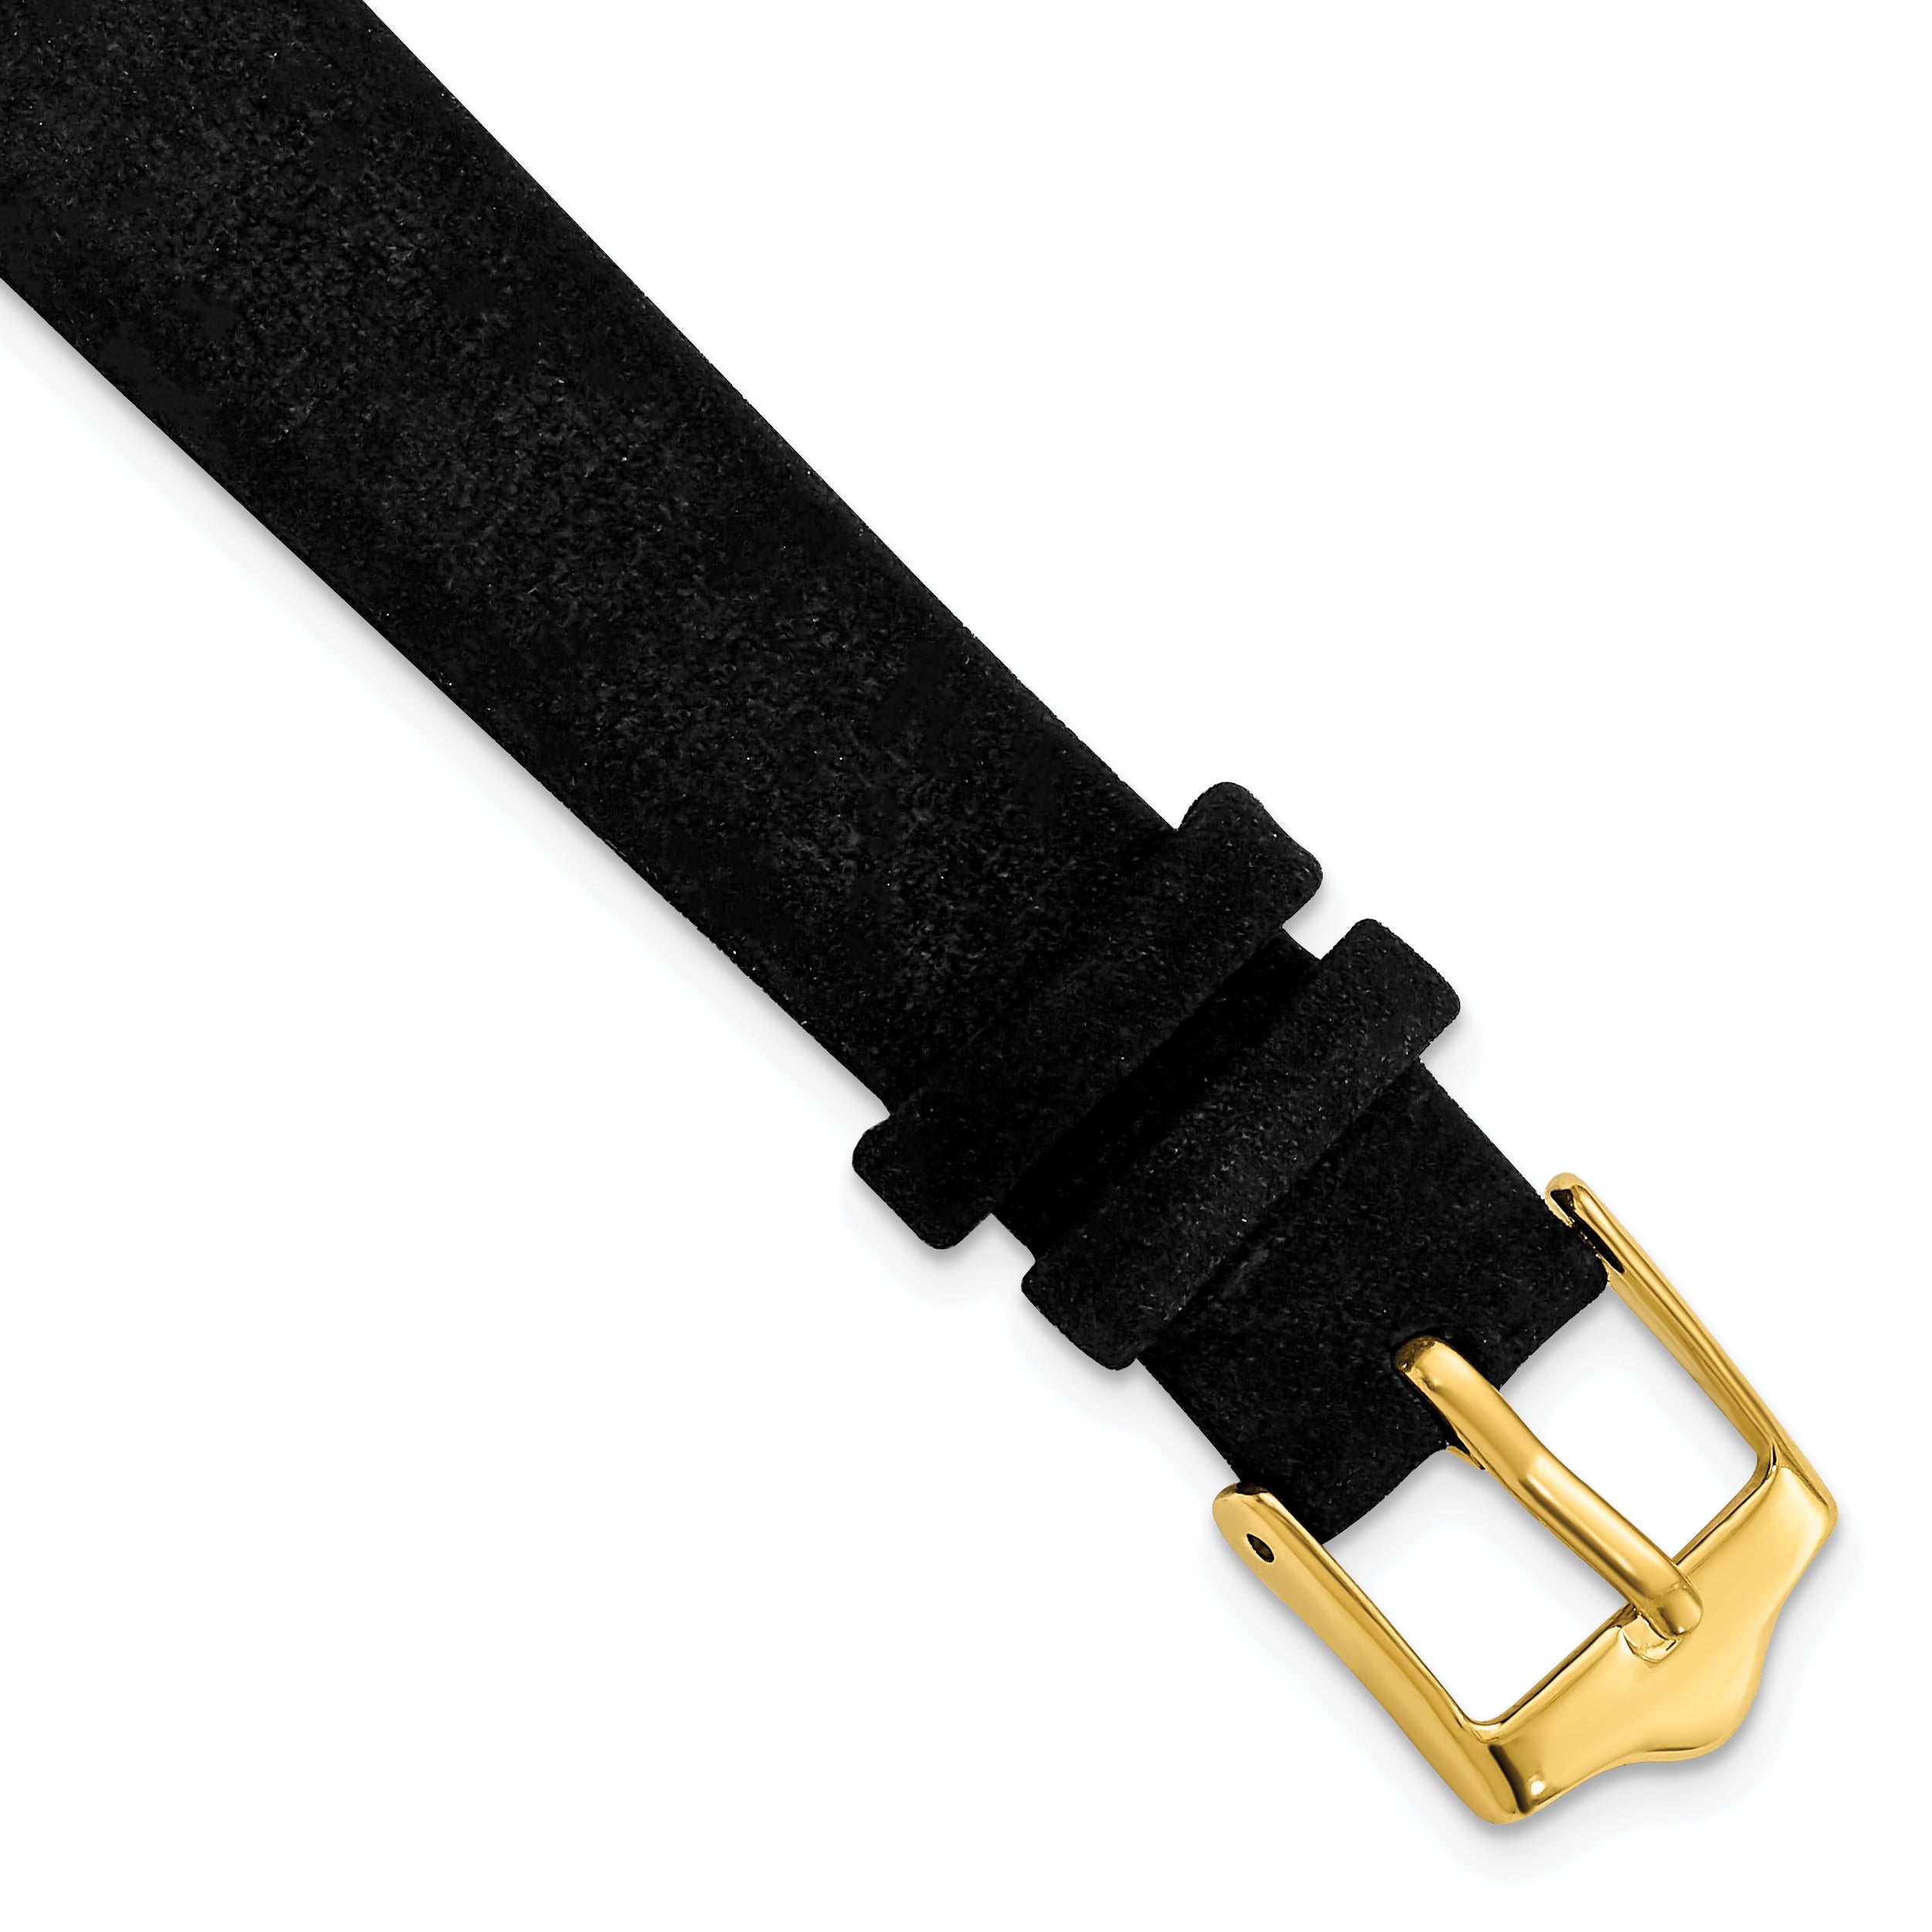 DeBeer 14mm Black Suede Flat Leather with Gold-tone Buckle 6.75 inch Watch Band